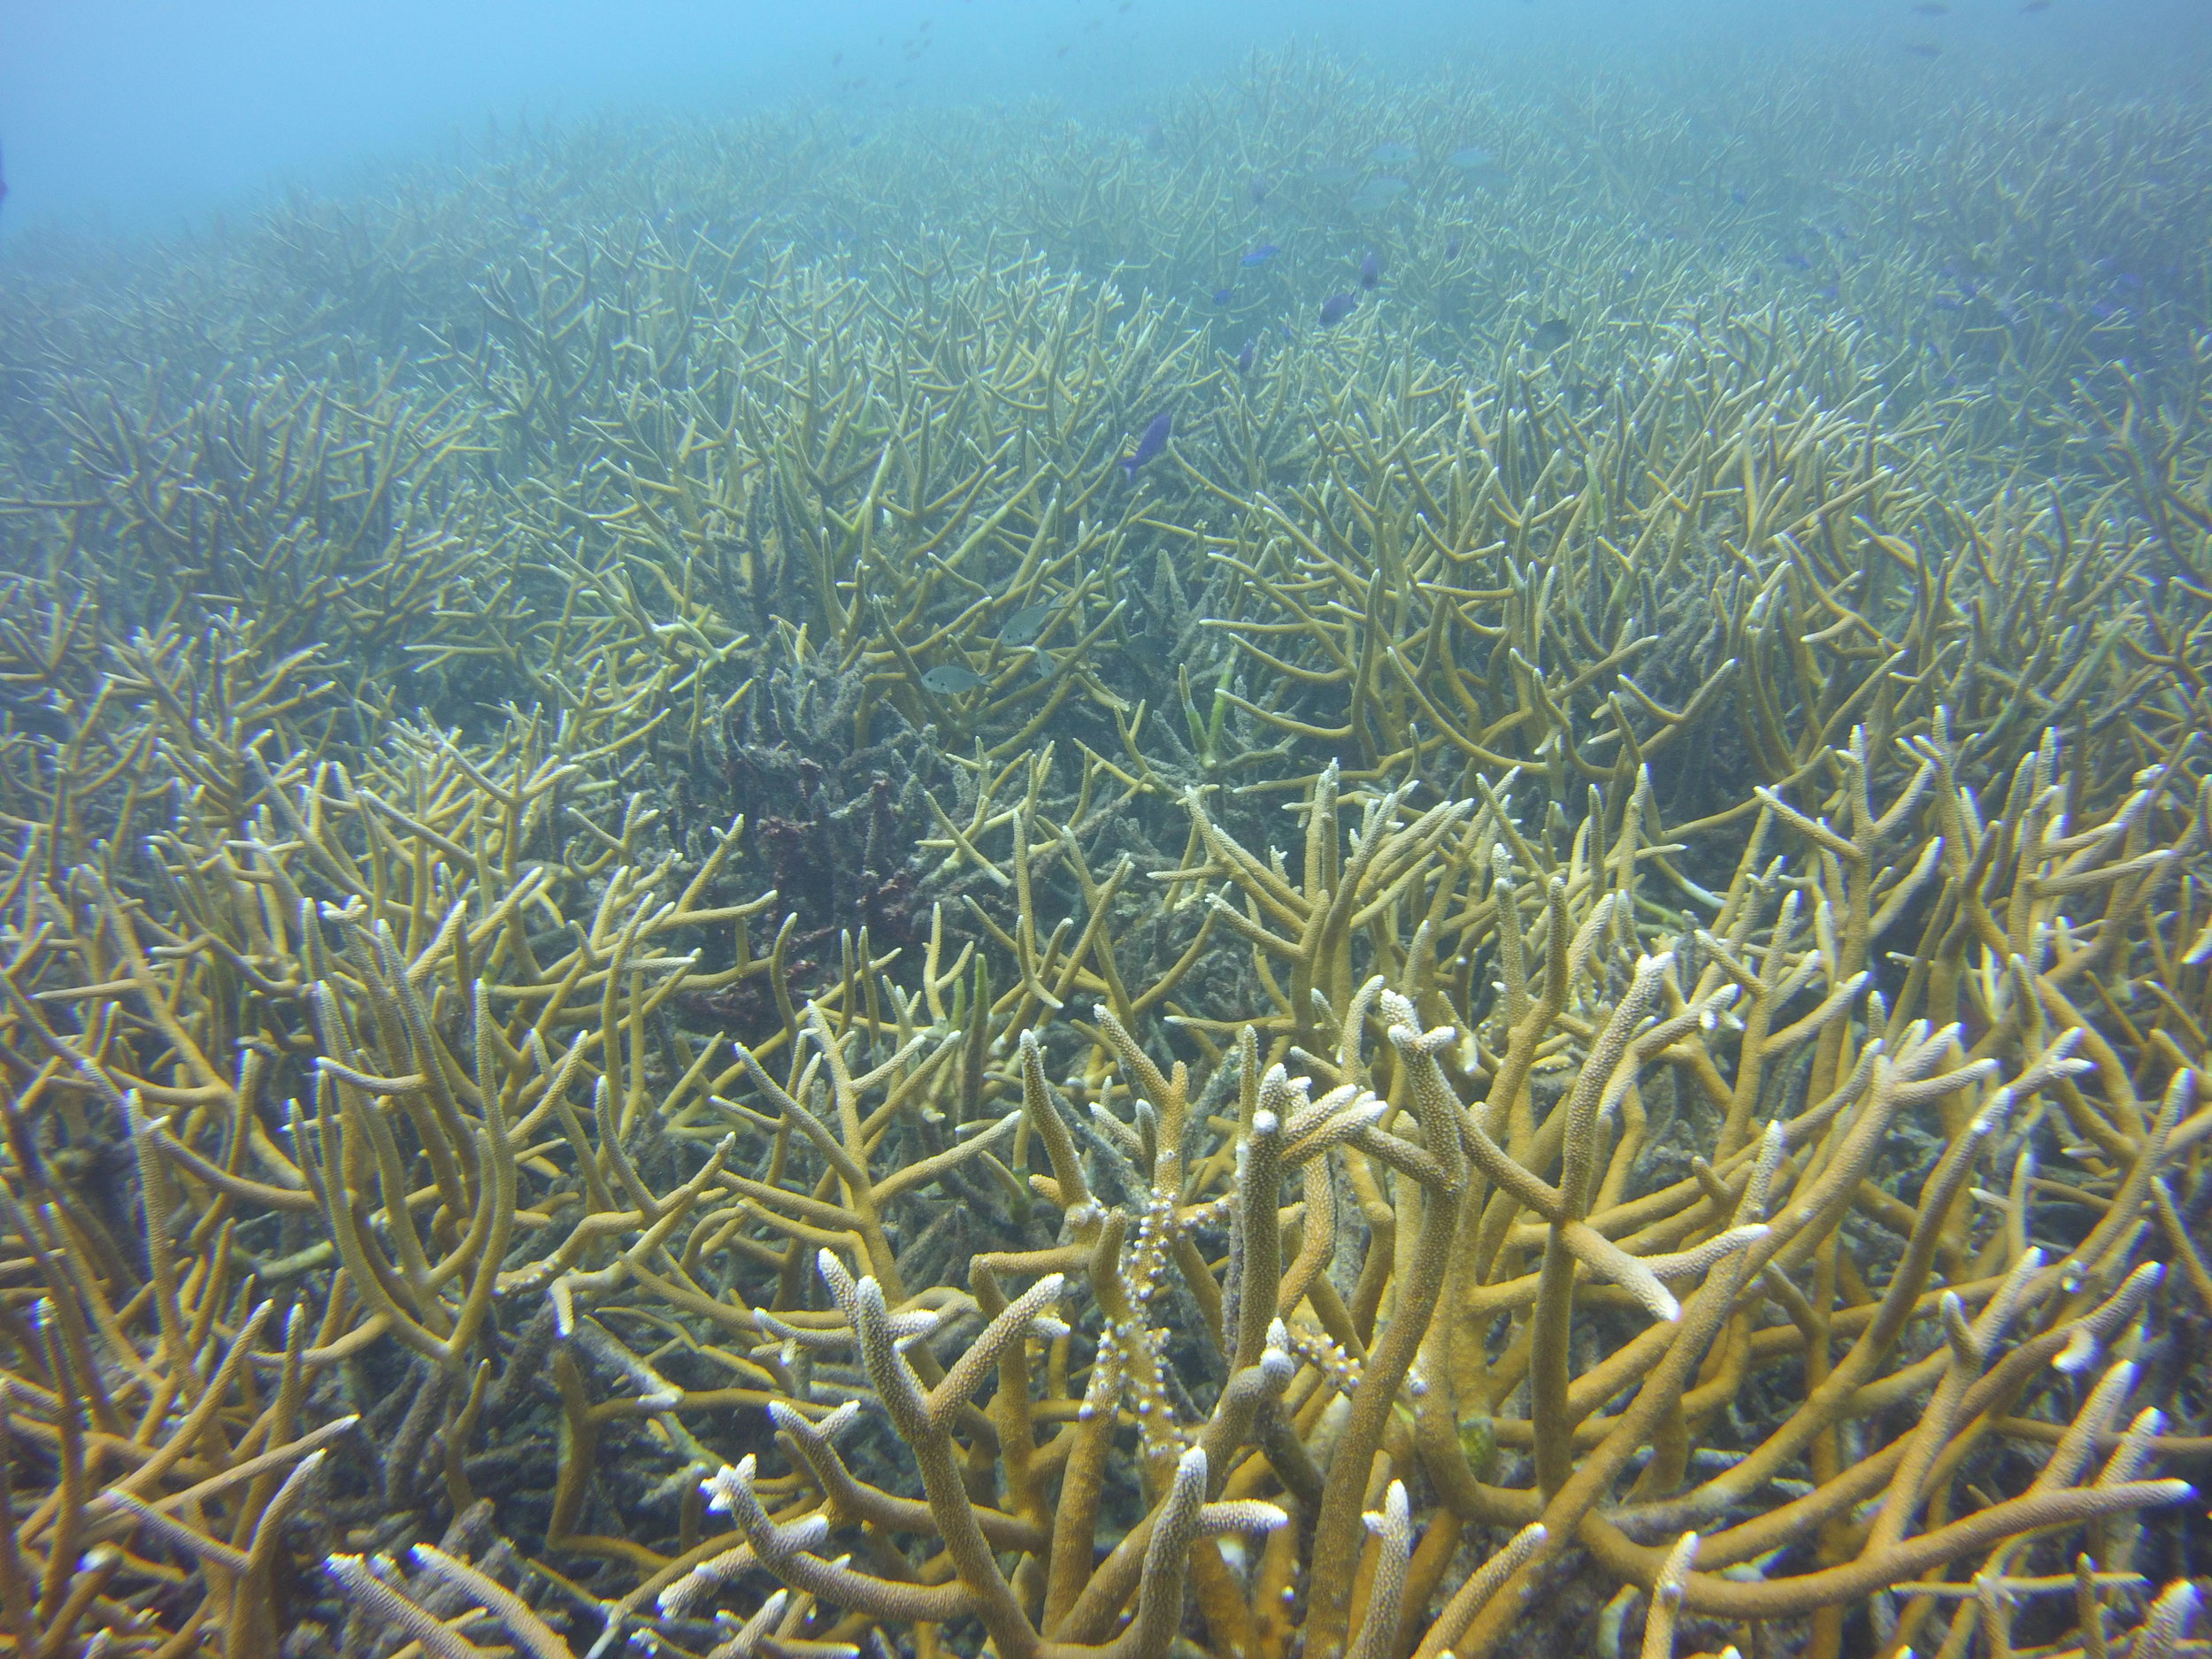 Healthy Corals, Shallow Water